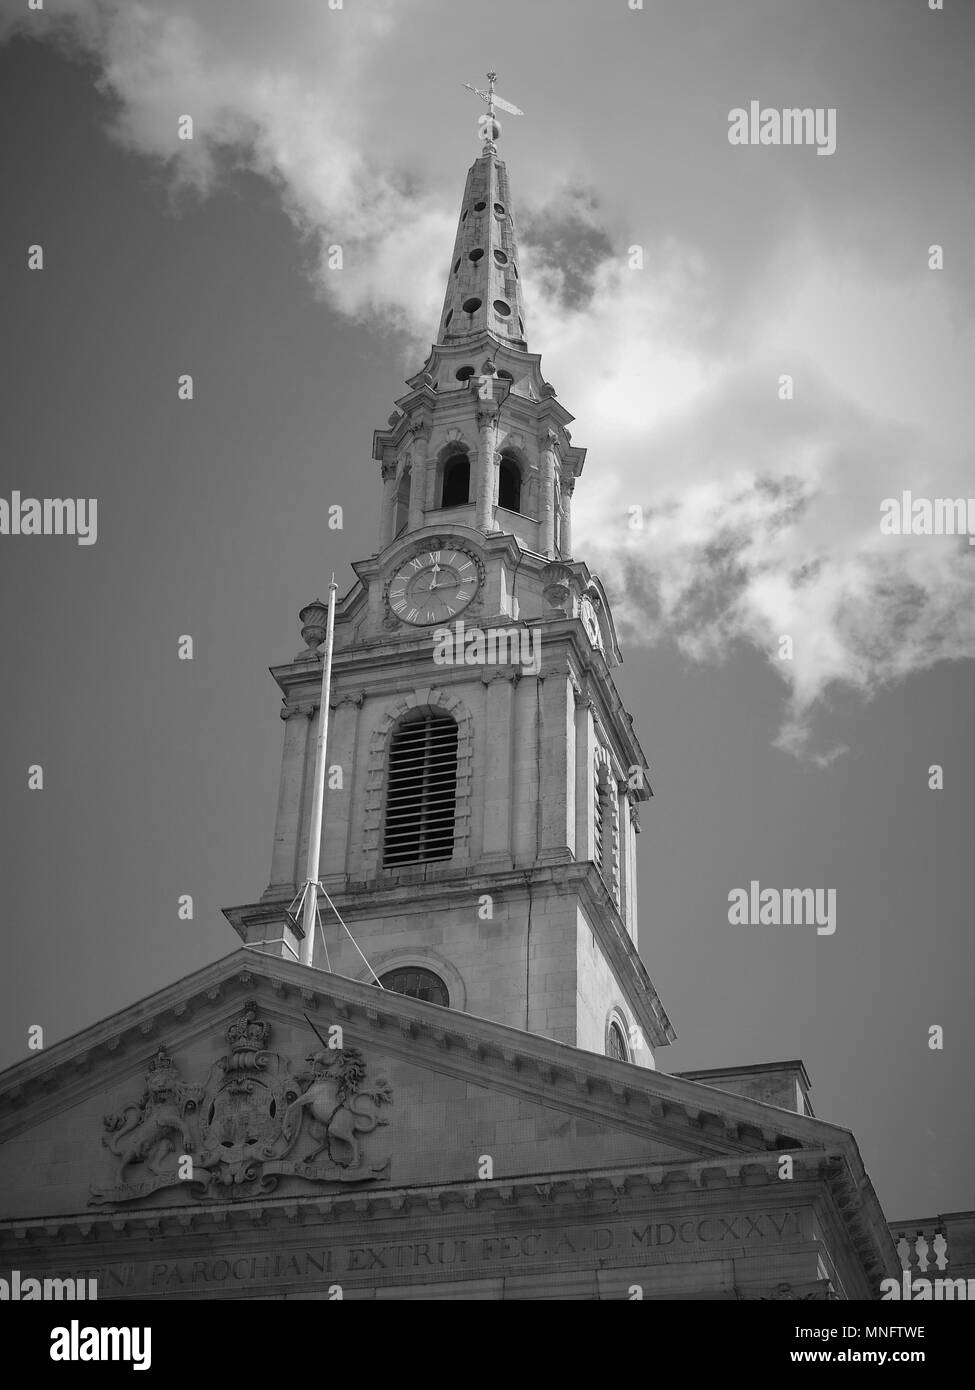 LONDON - MAY 10, 2018: ( Image digitally altered to monochrome ) Clouds passing the iconic St Martin-in-the-Fields church spire Stock Photo